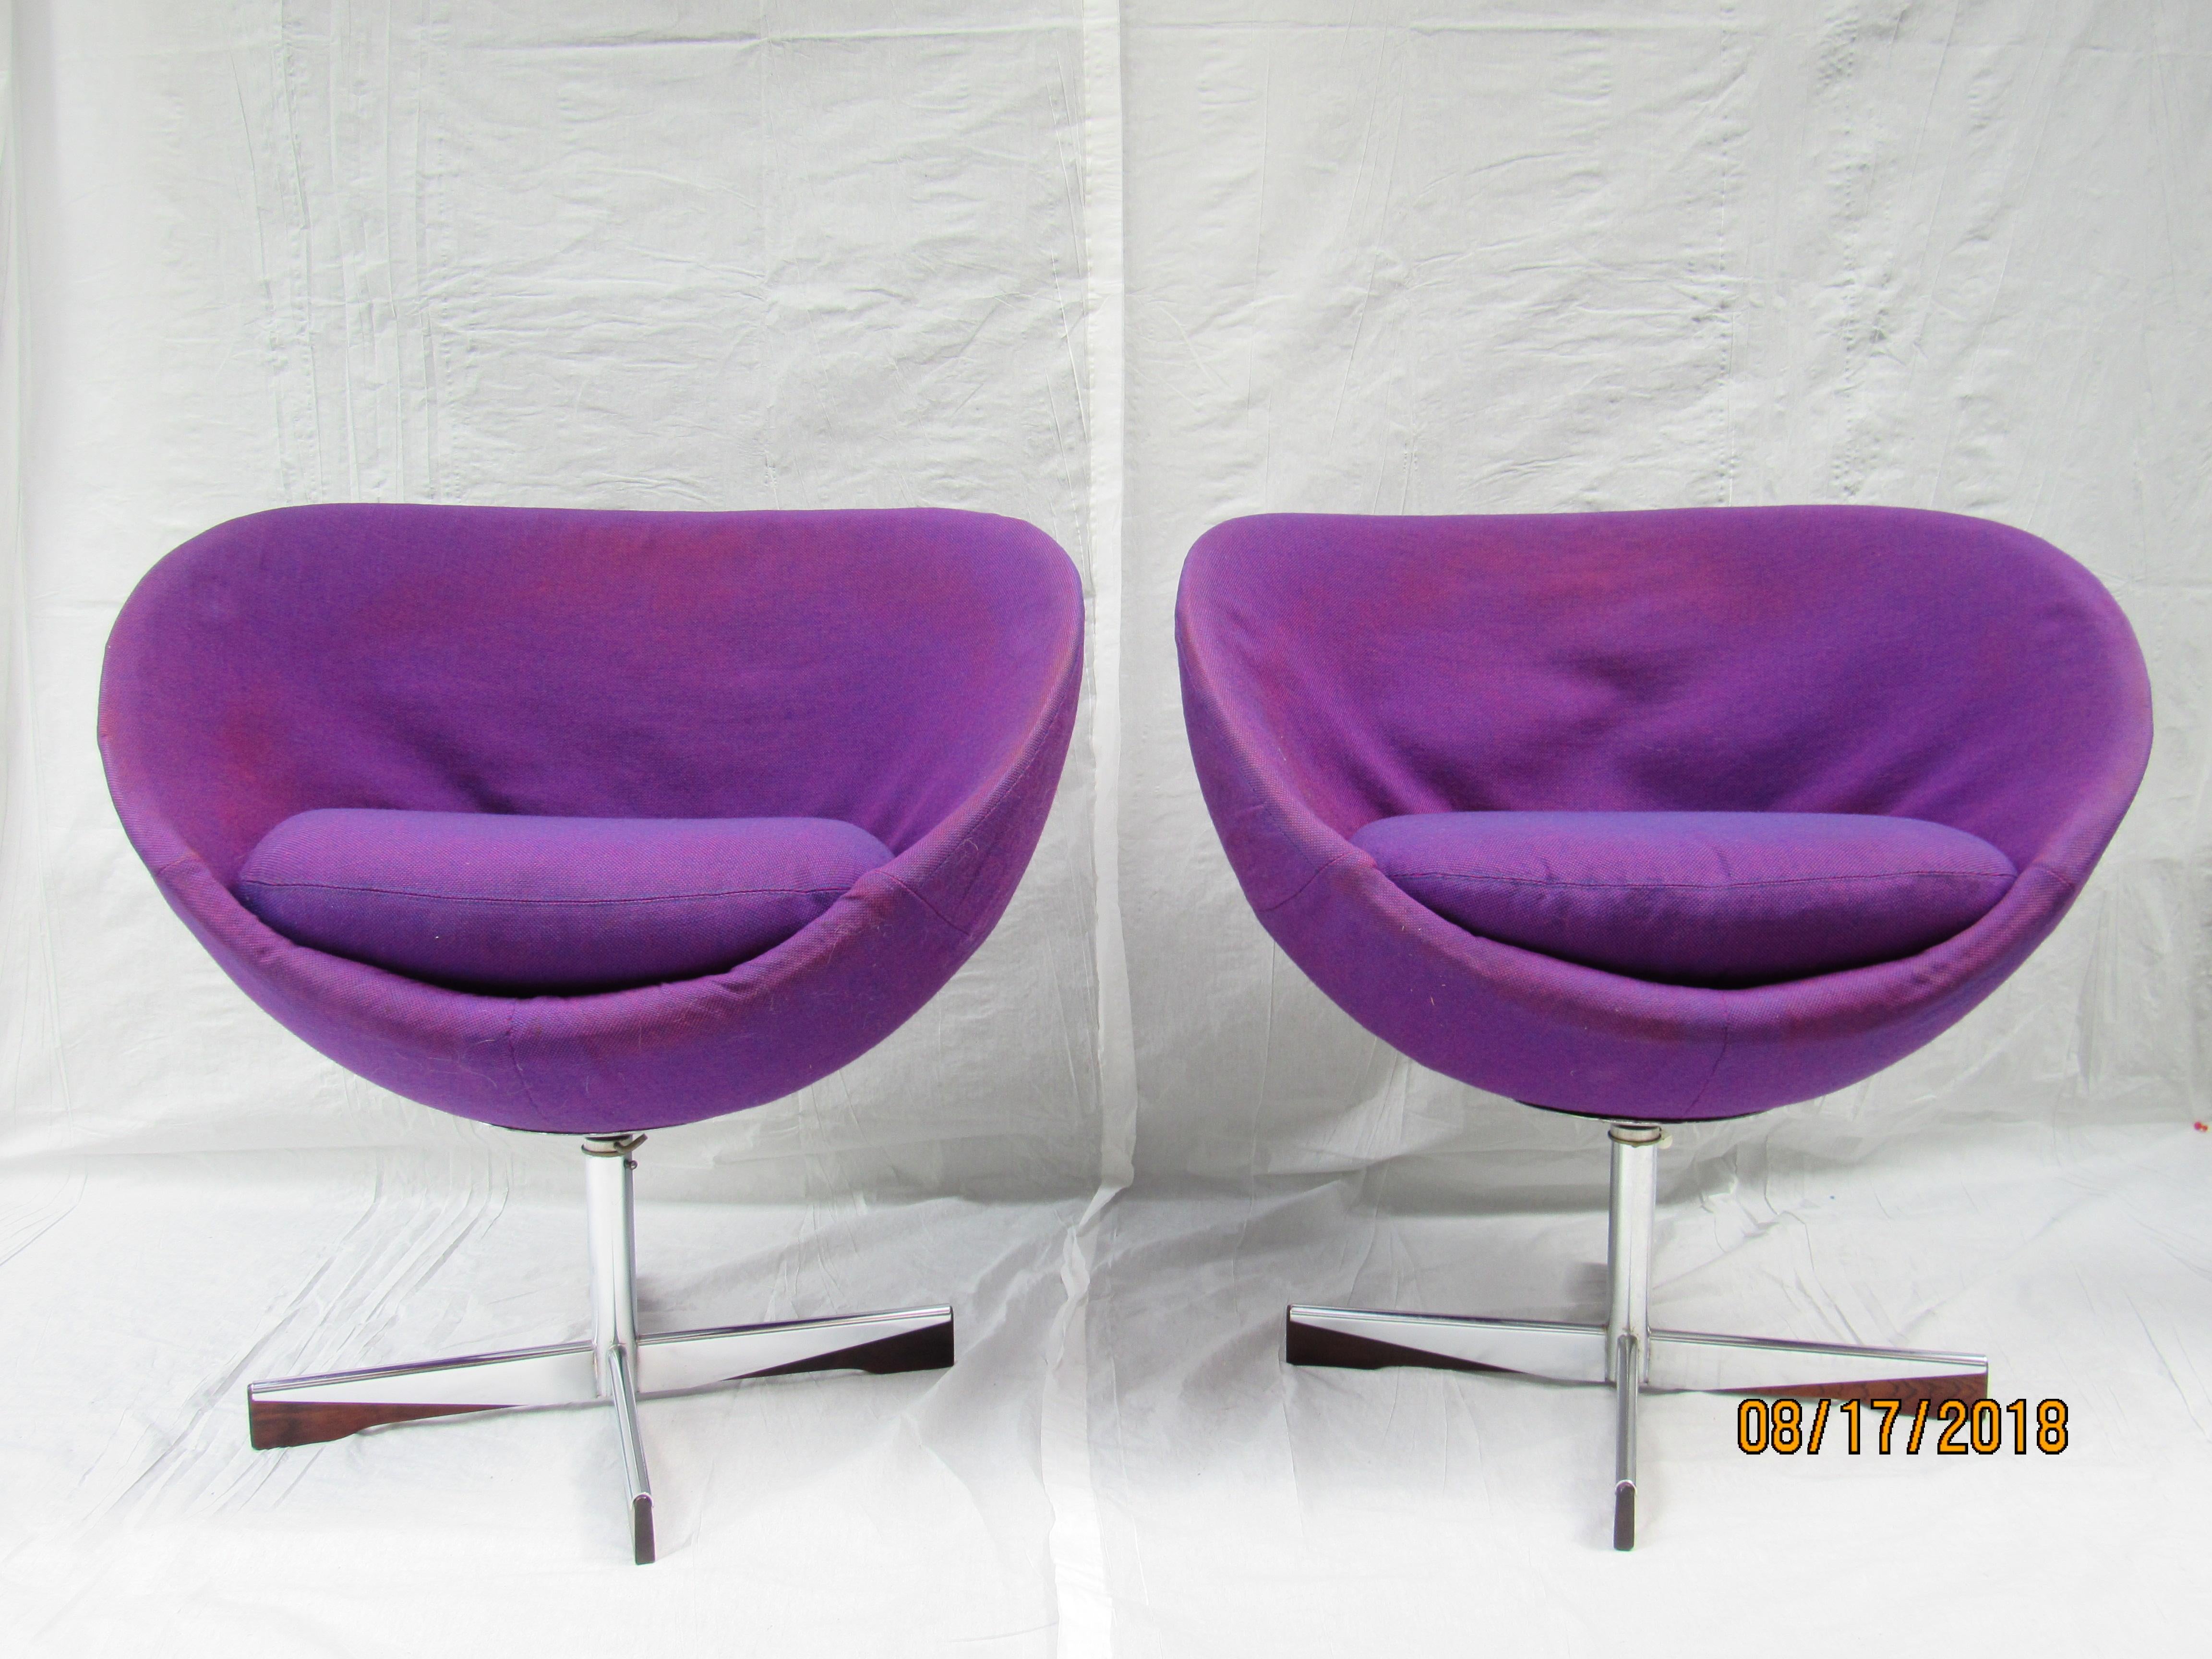 A pair of planet chairs by Sven Ivar for Westnova of Norway imported by Georg Jensen from 1968.
The chairs swivel and have a 2 inch adjustment in height with a locking mechanism.
Each base is rosewood cased in a chrome cover.
The upholstery and